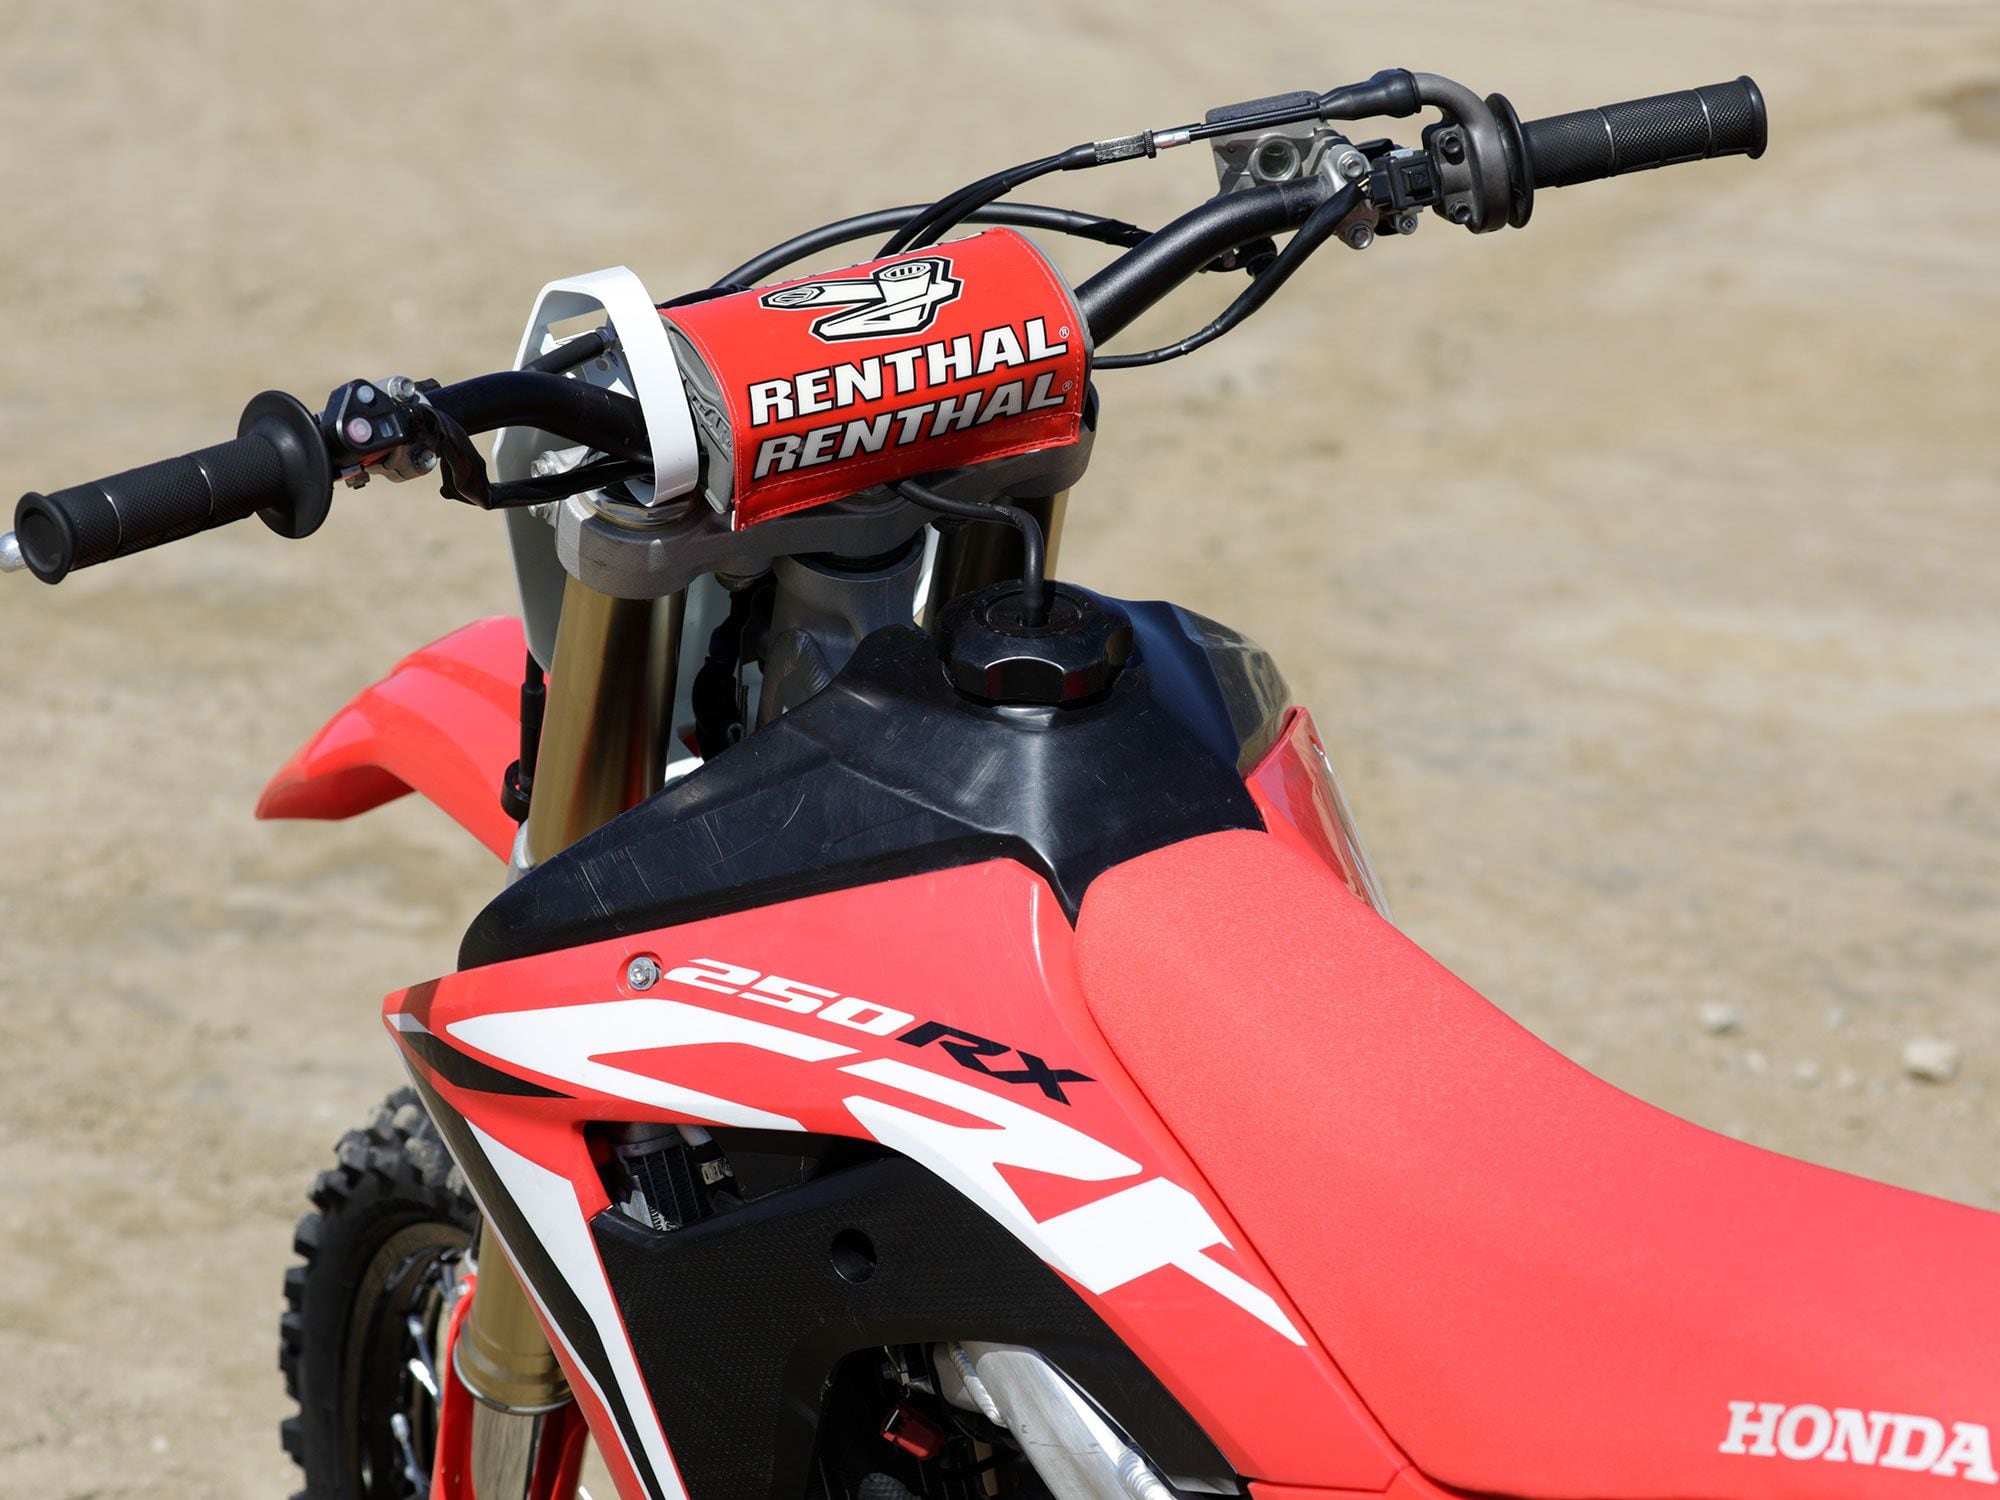 In typical dirt bike form, the CRF250RX uses an upright Renthal handlebar that can be moved forward or rearward depending on rider preference.